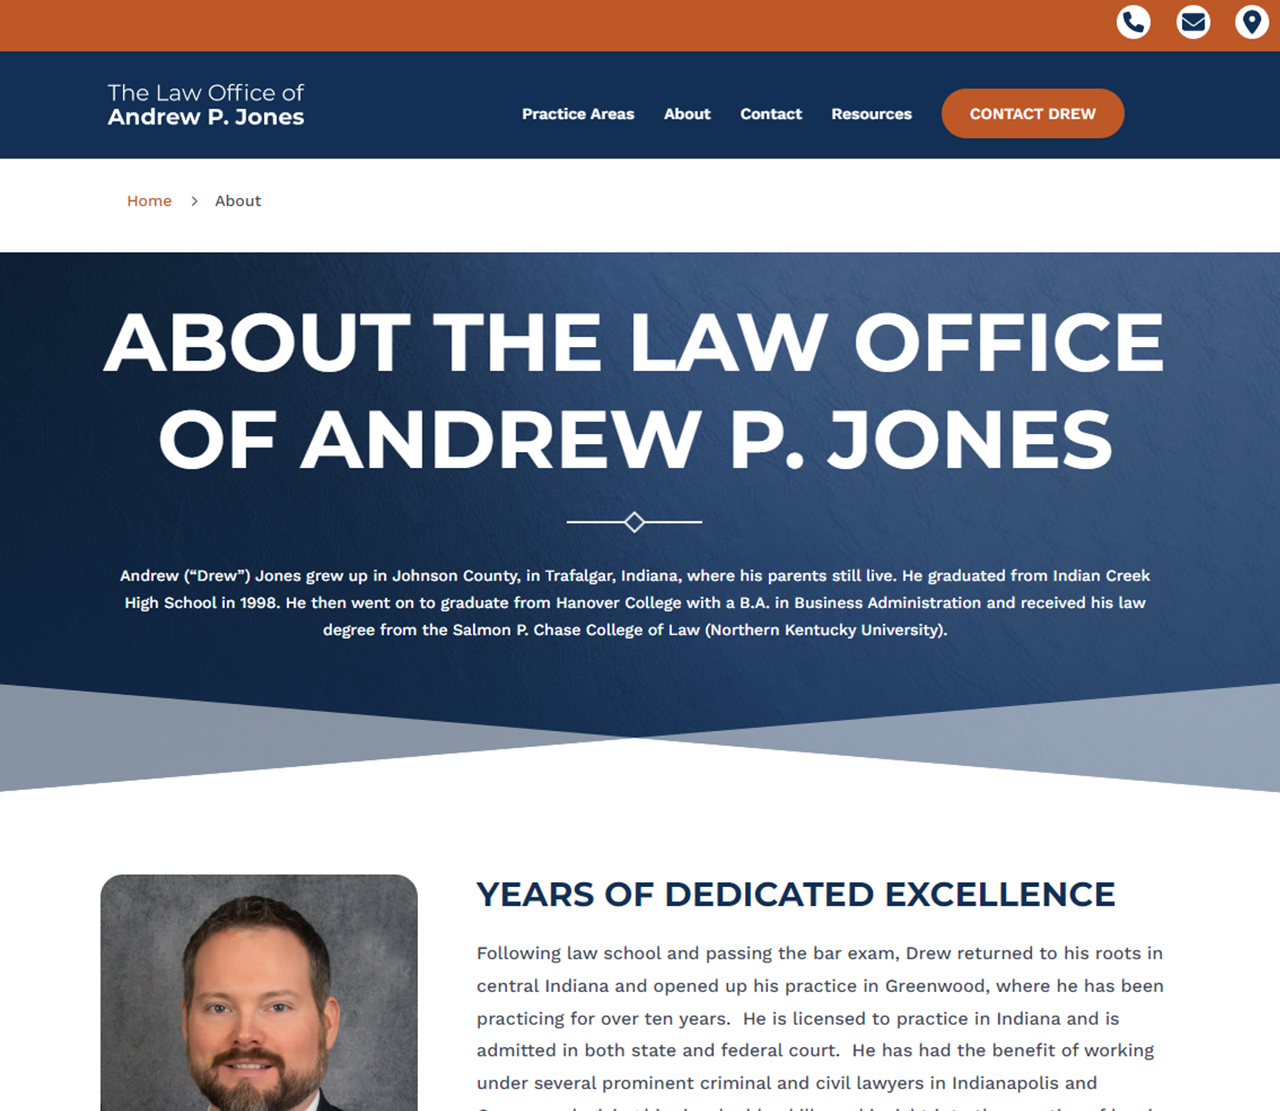 The Law Office of Andrew P. Jones Website About Page